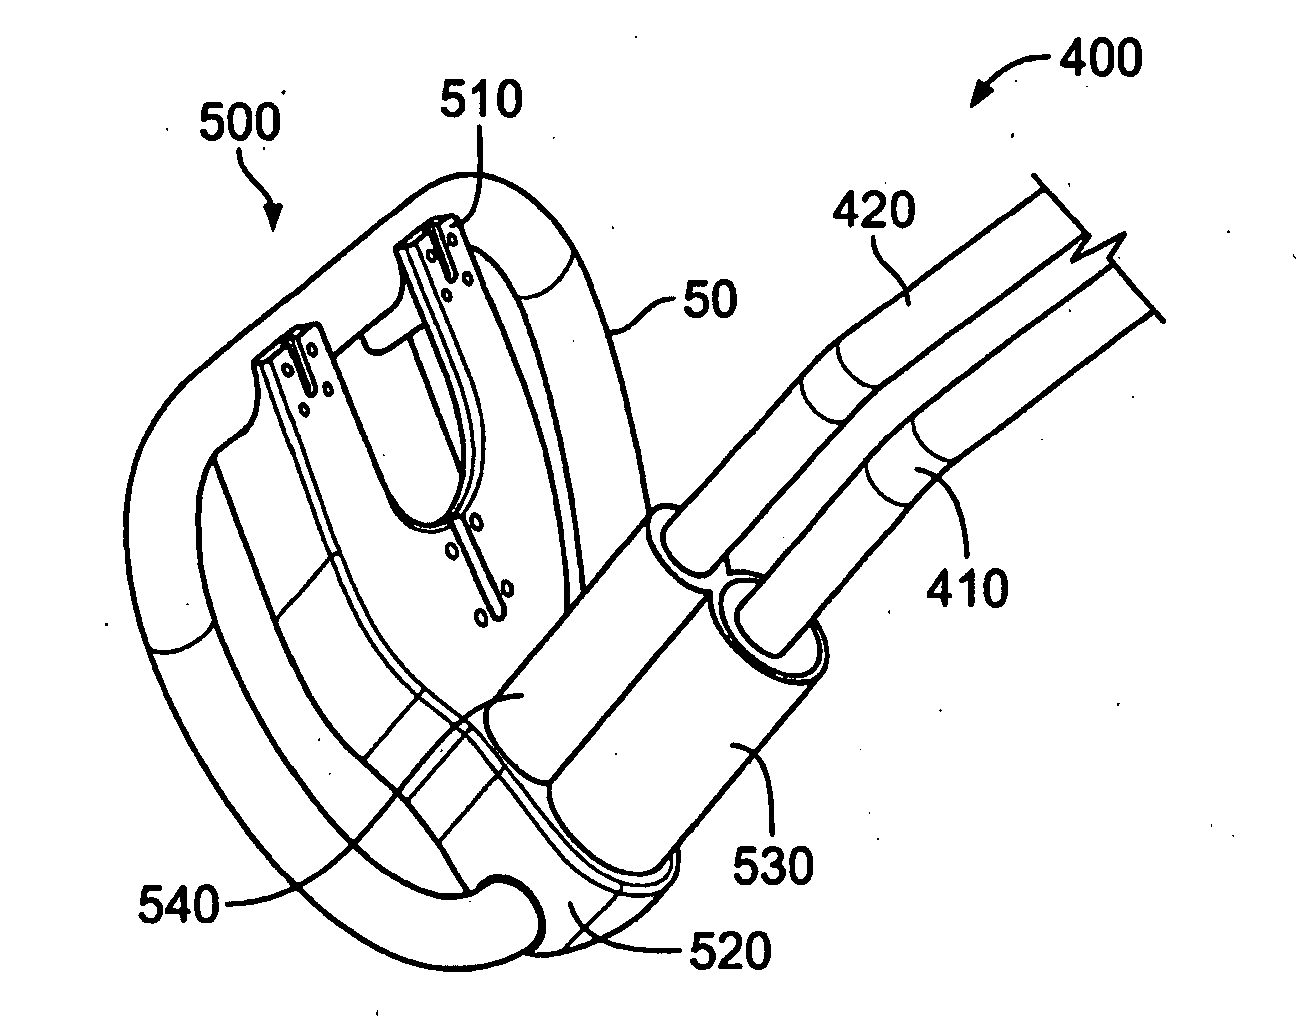 Adjustable prosthetic anatomical device holder and handle for the implantation of an annuloplasty ring